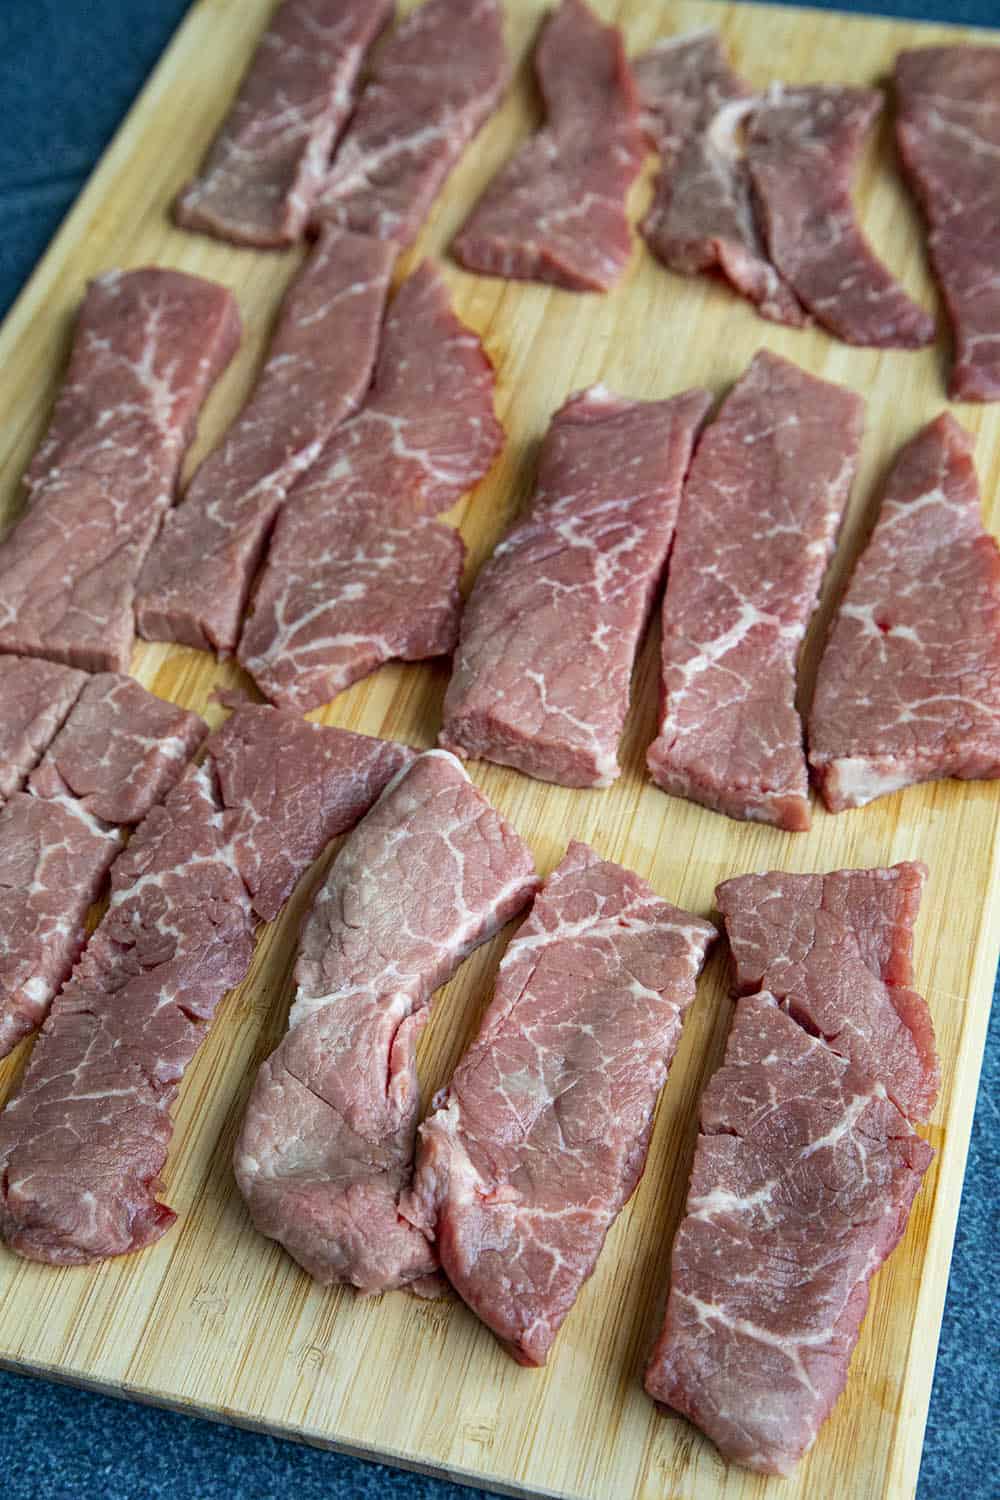 Strips of raw beef on a wooden board